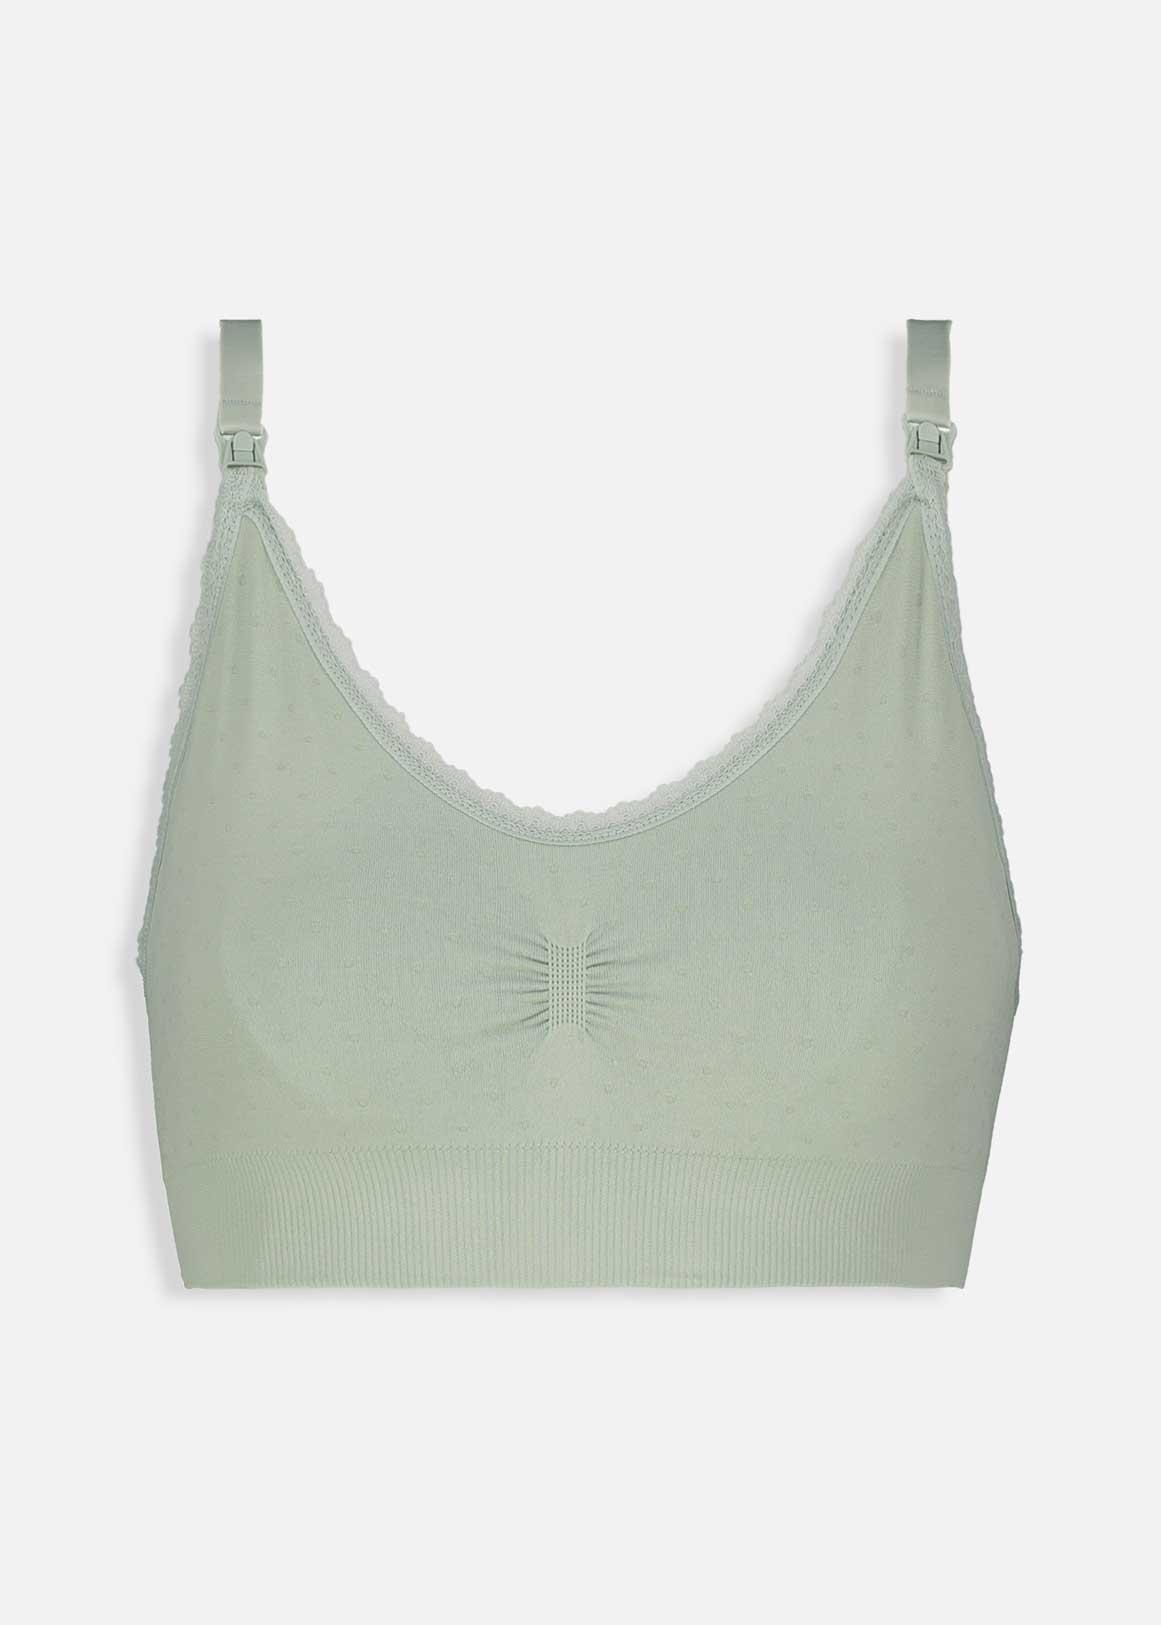 Mrat Clearance Breezies Bras Clearance Women's No Wire Lactation